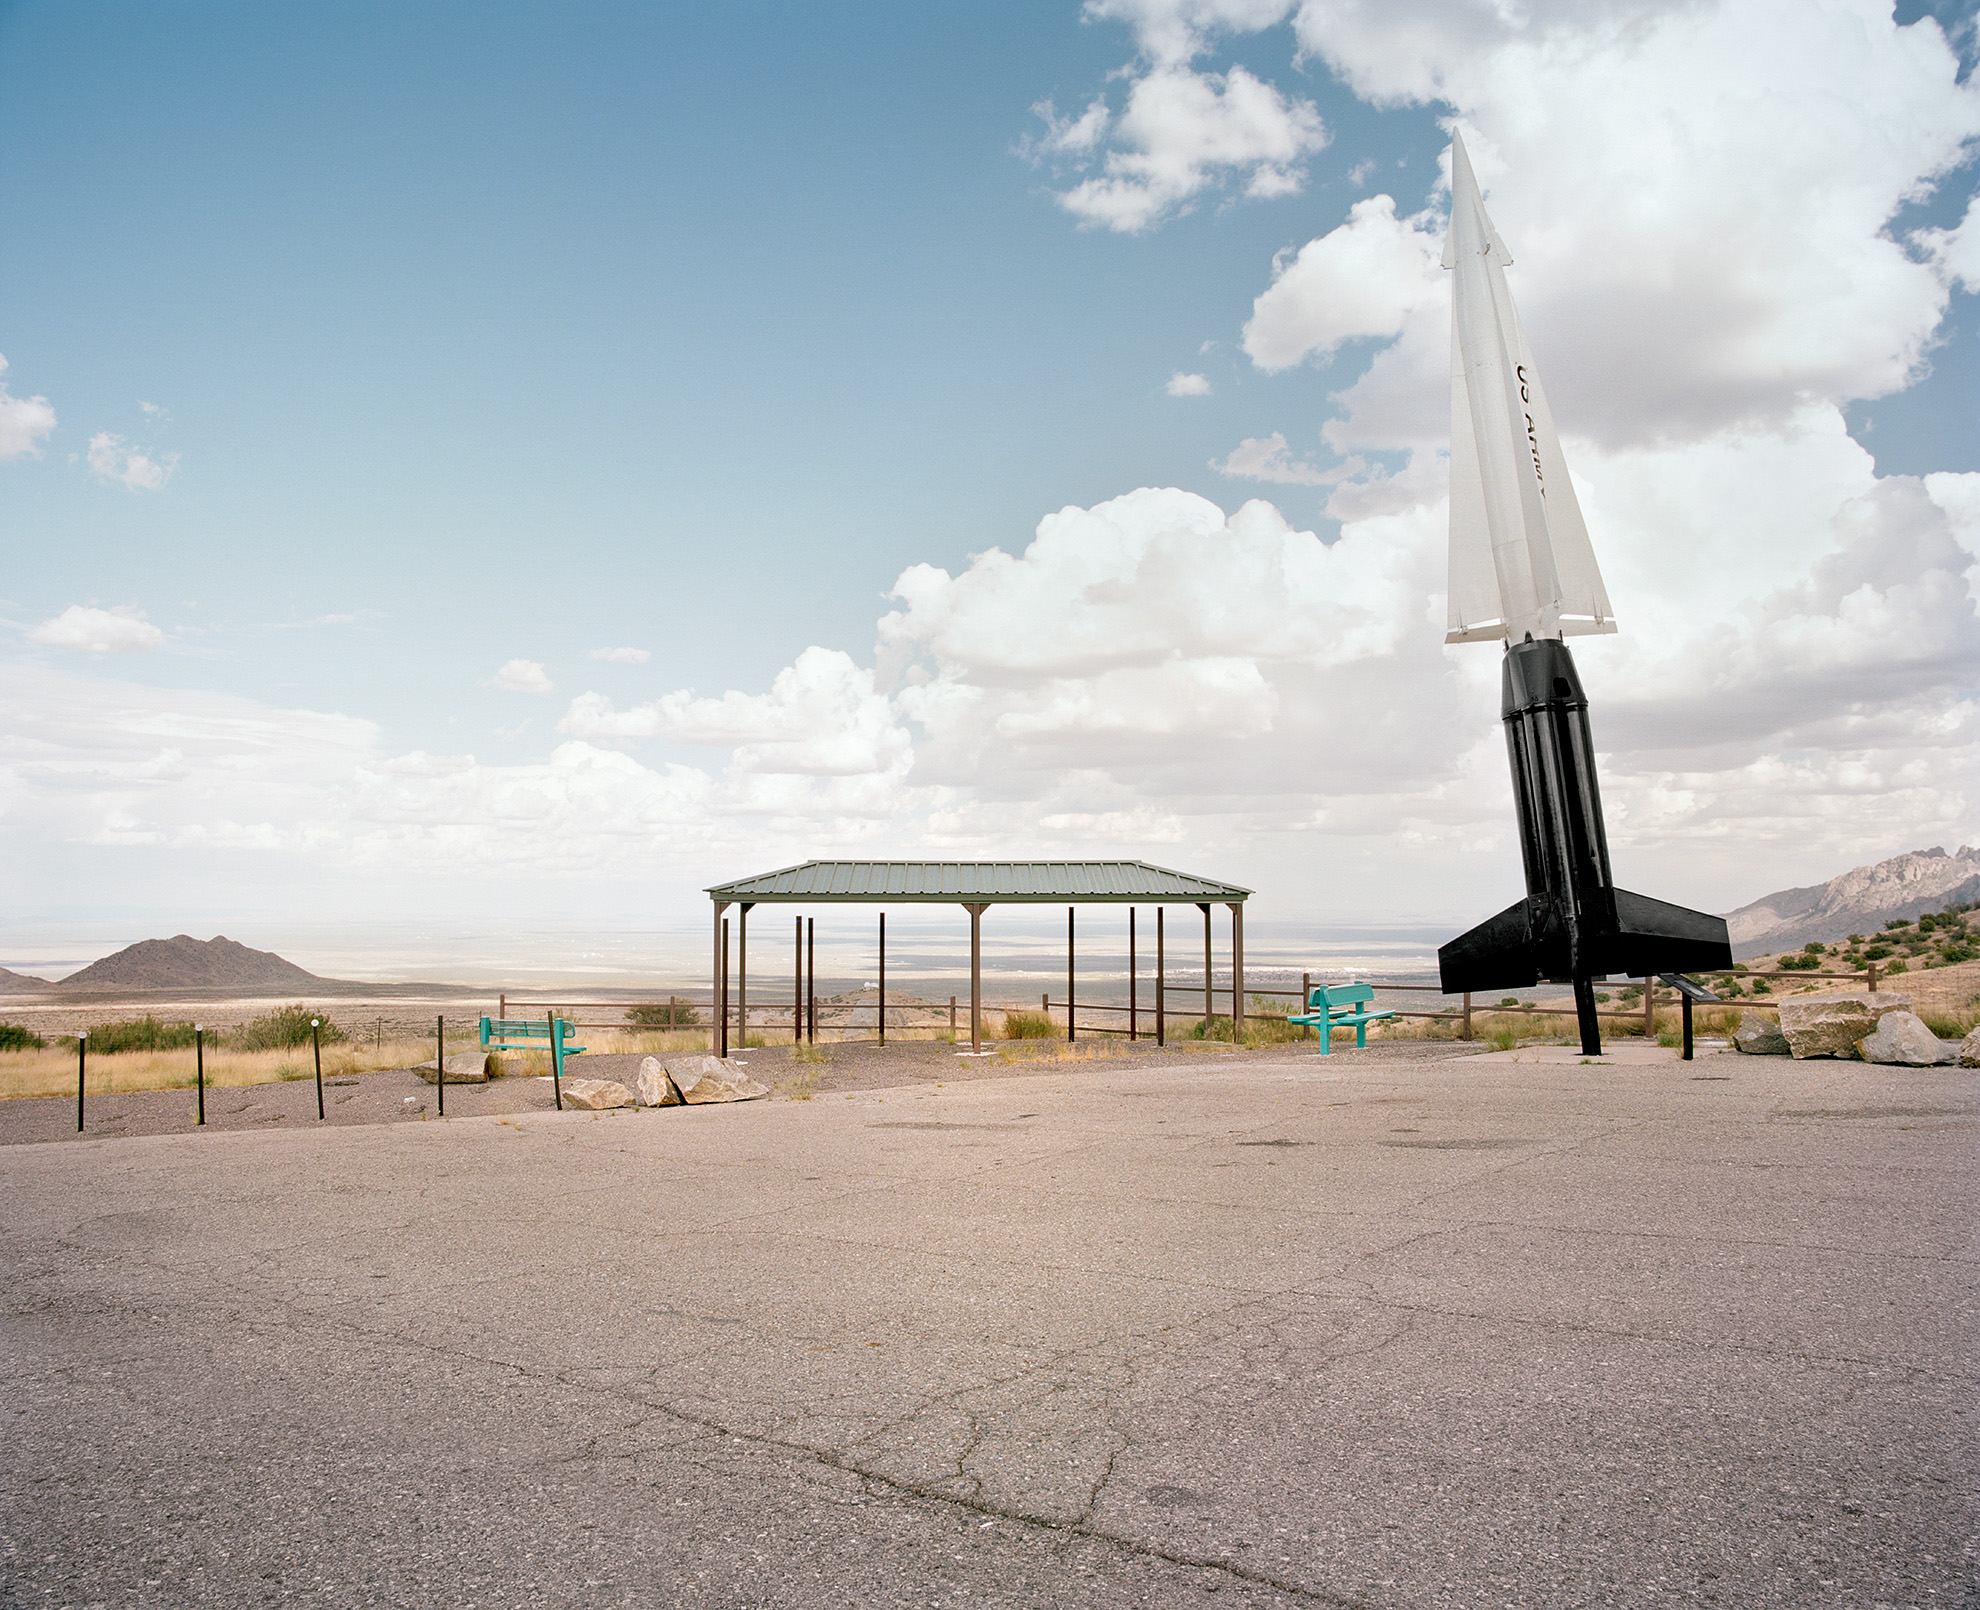 Humble Rest Stops Are Endangered Monuments Of America’s Highways